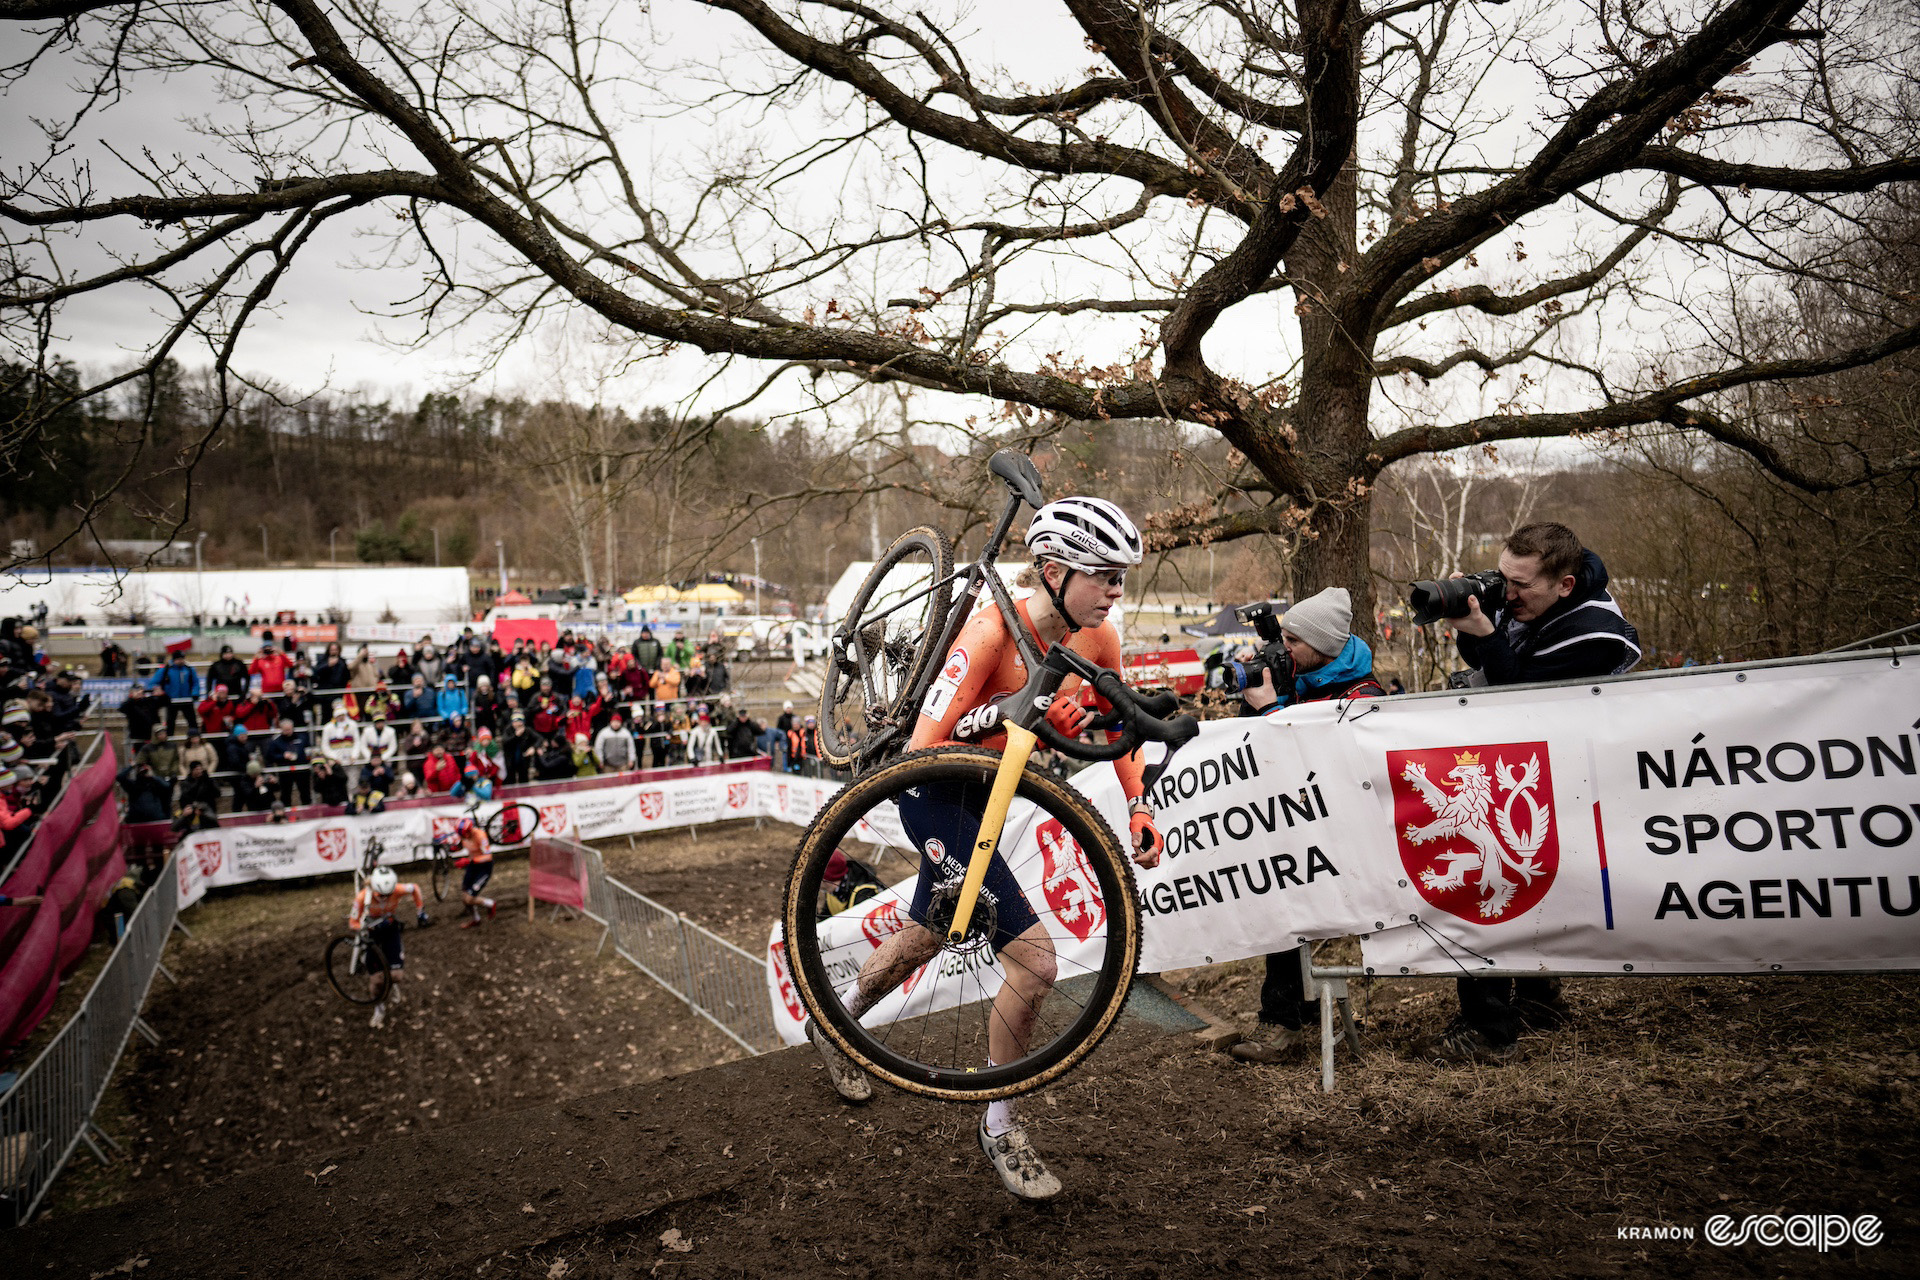 Dutch rider Fem van Empel leads the way up to the top of the stairs on foot during the 2024 Cyclocross World Championships in Tábor, compatriots Puck Pieterse and Lucinda Brand chasing behind.